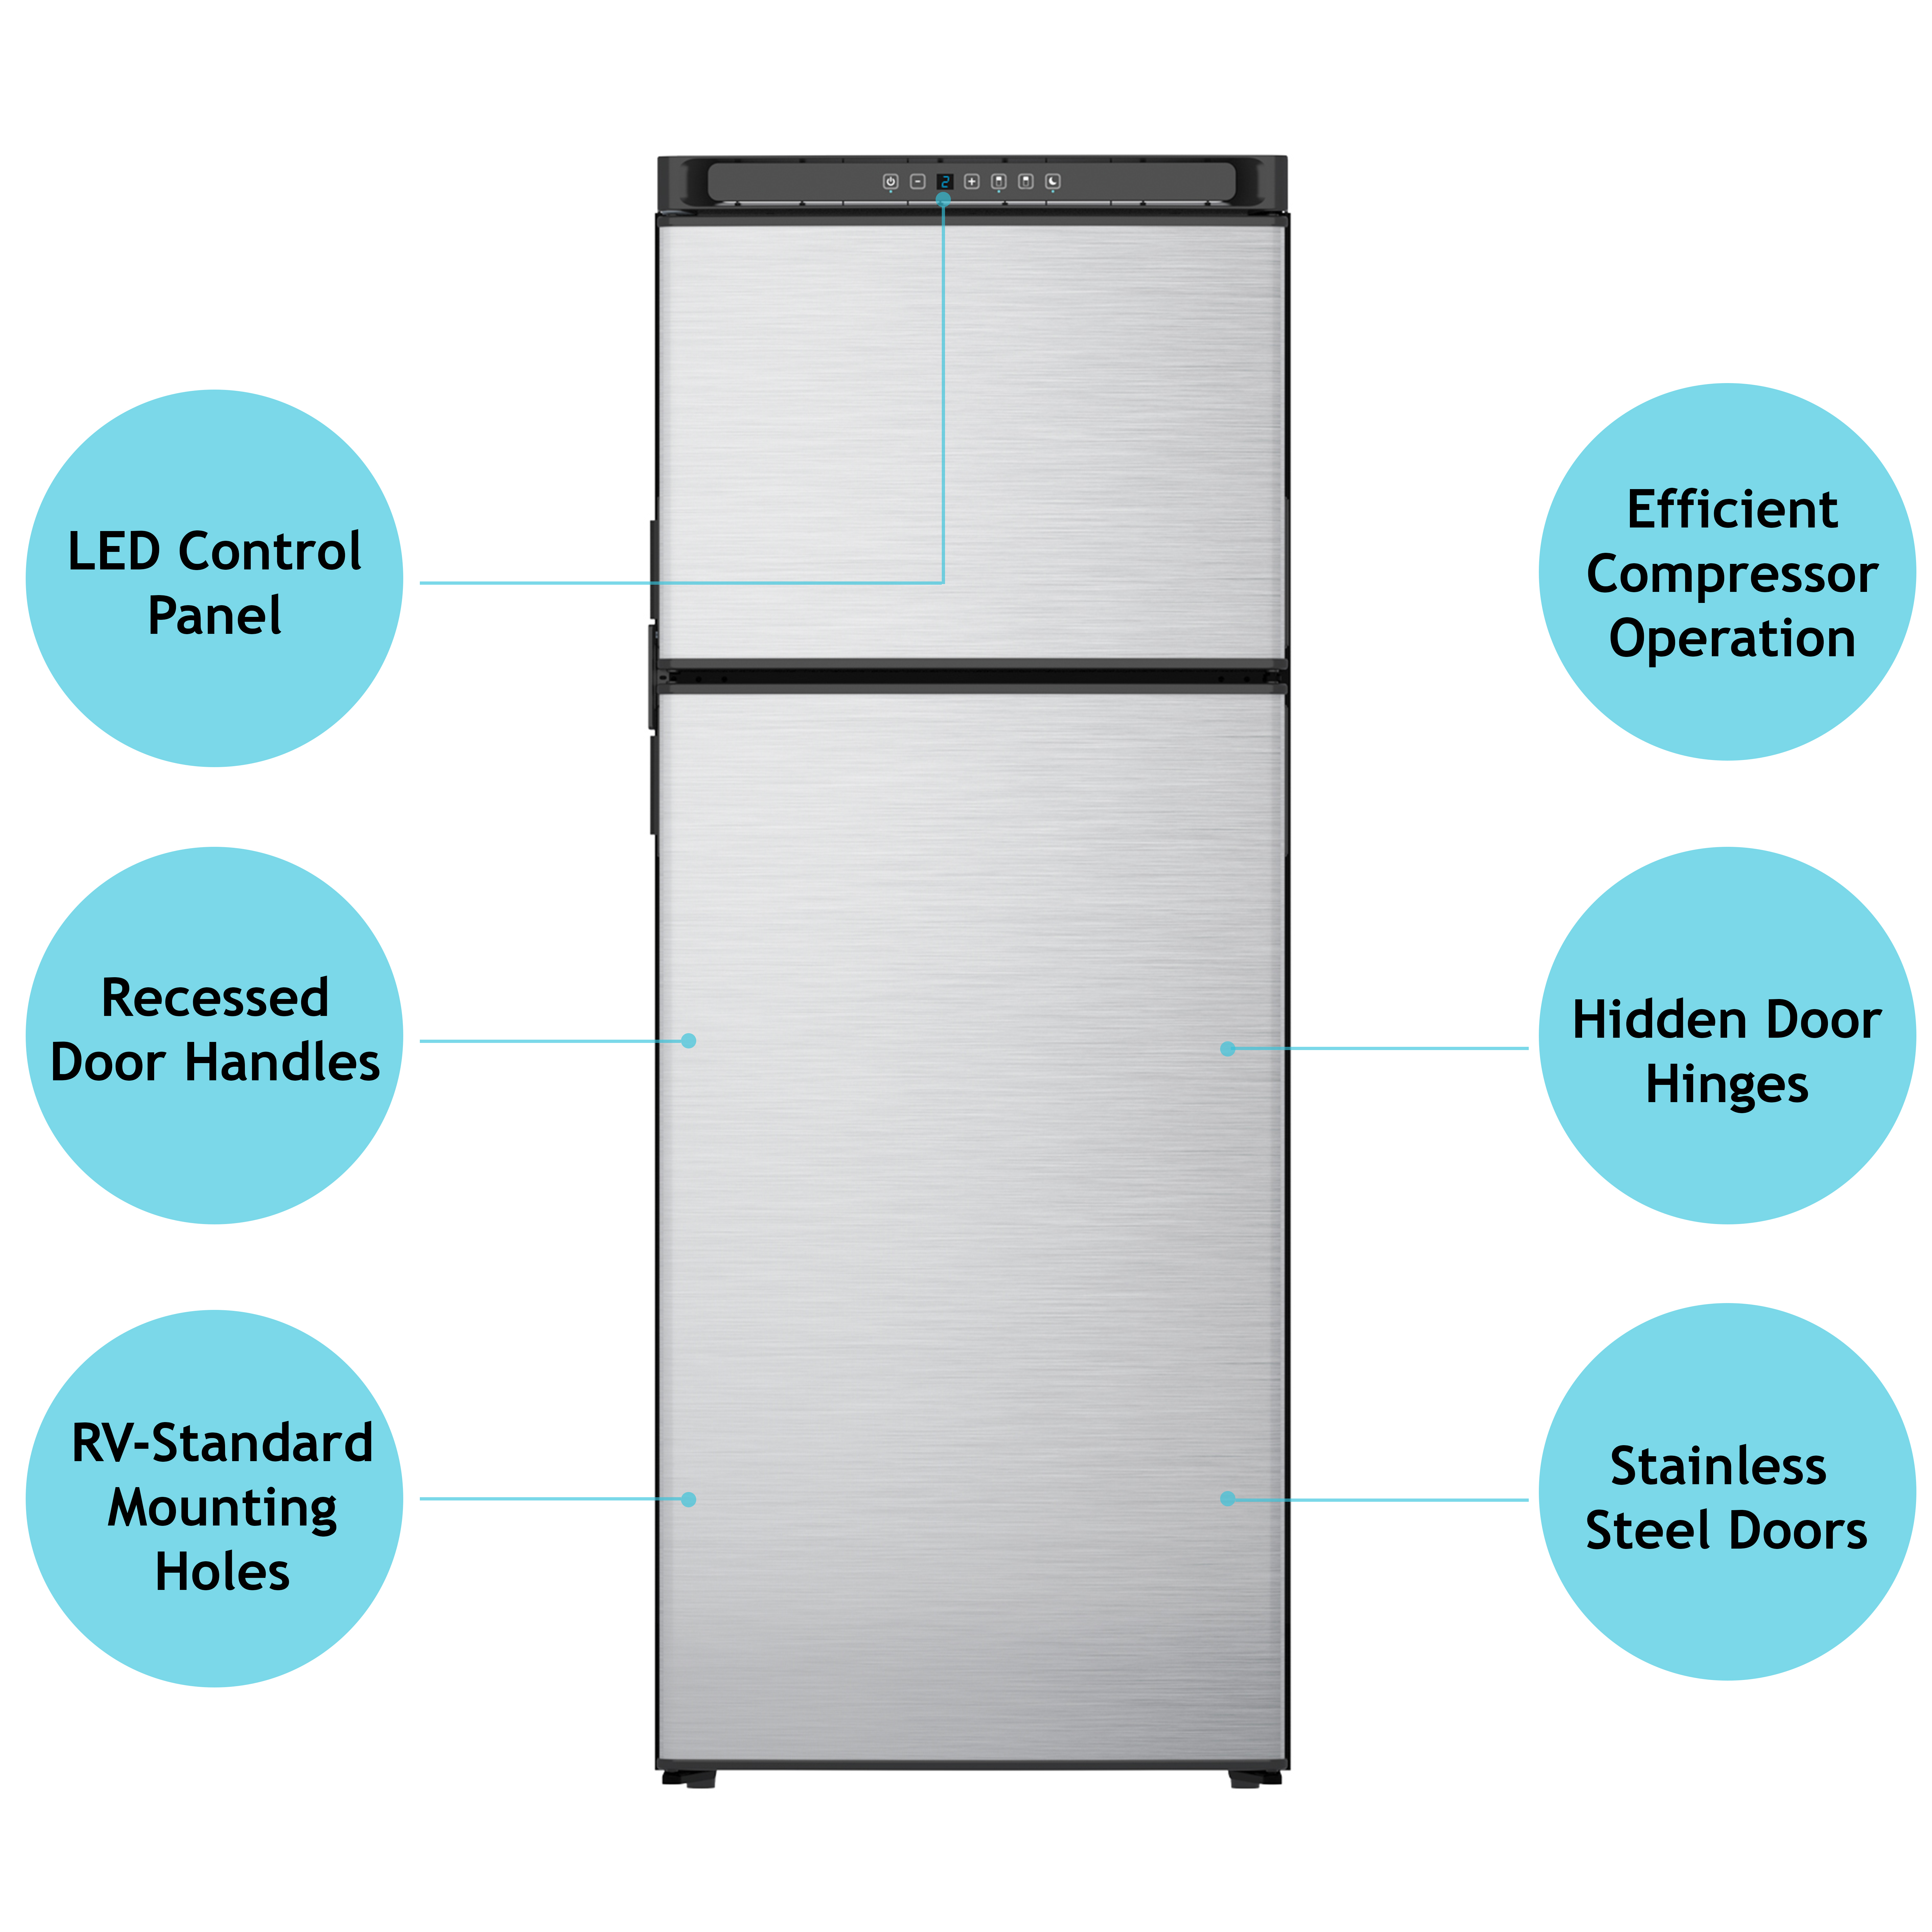 Norcold NR751SS Refrigerator (2.7 cubic foot) duel electric, AC/DC